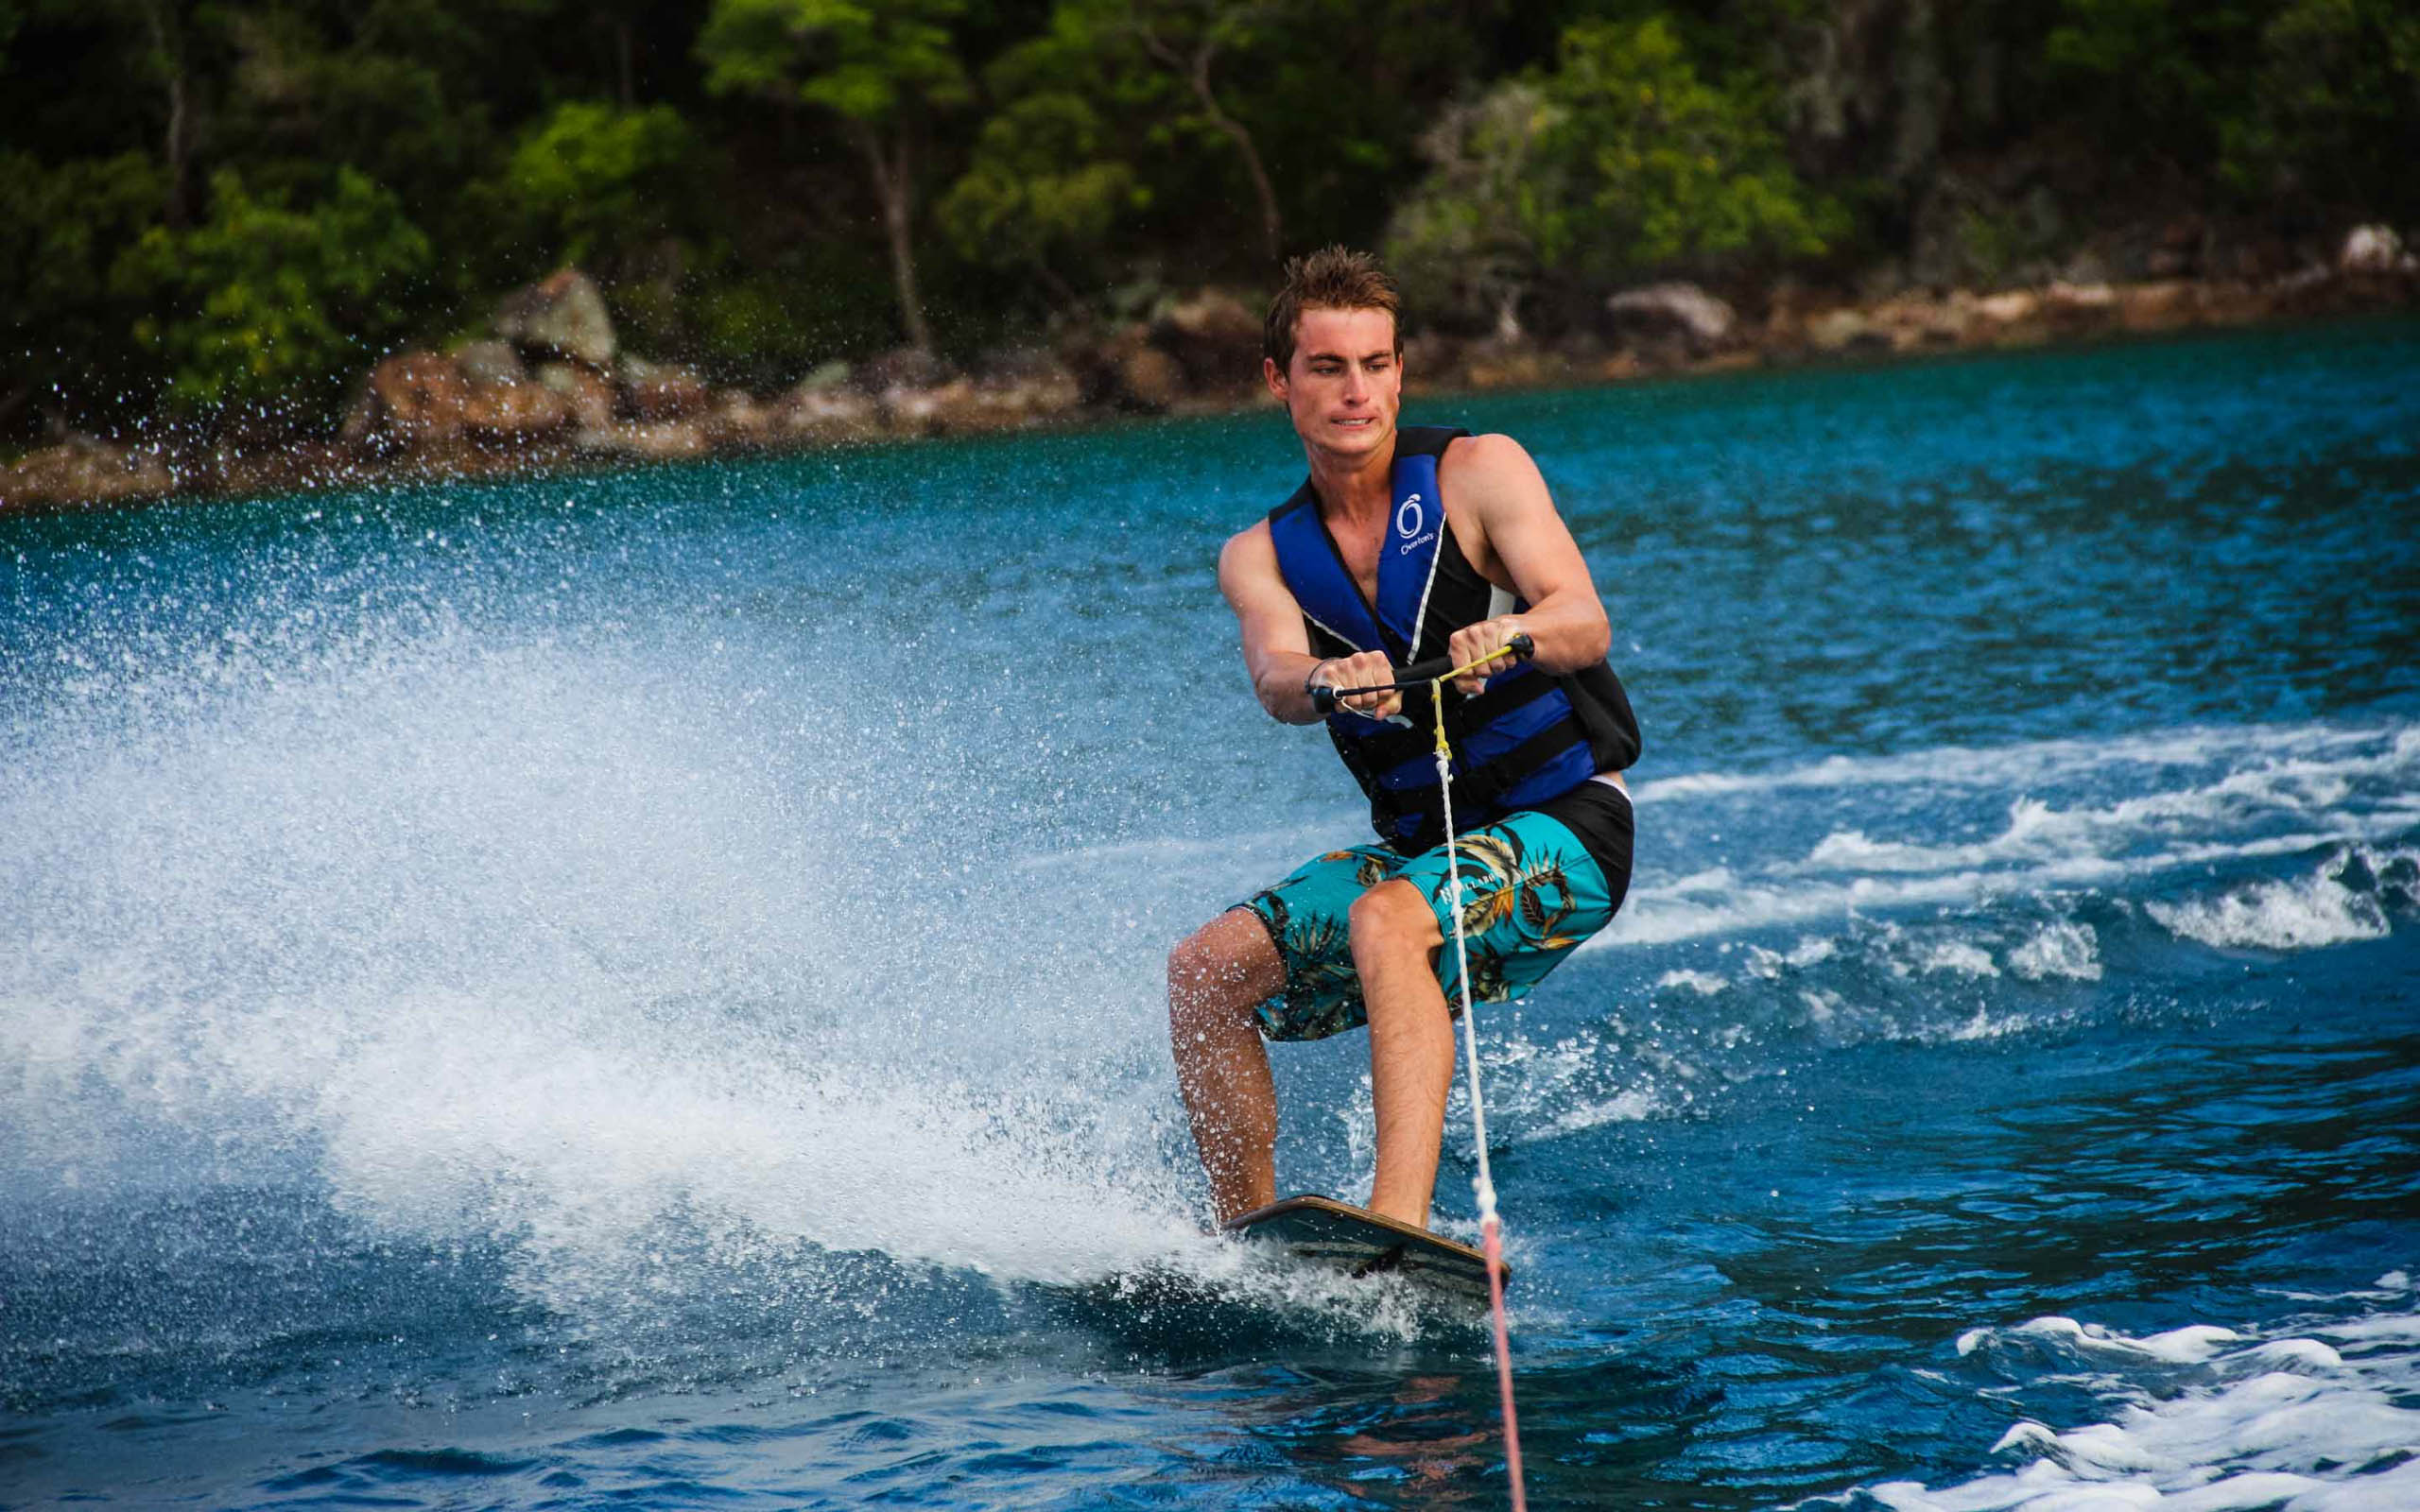 A man is water skiing in the blue water.